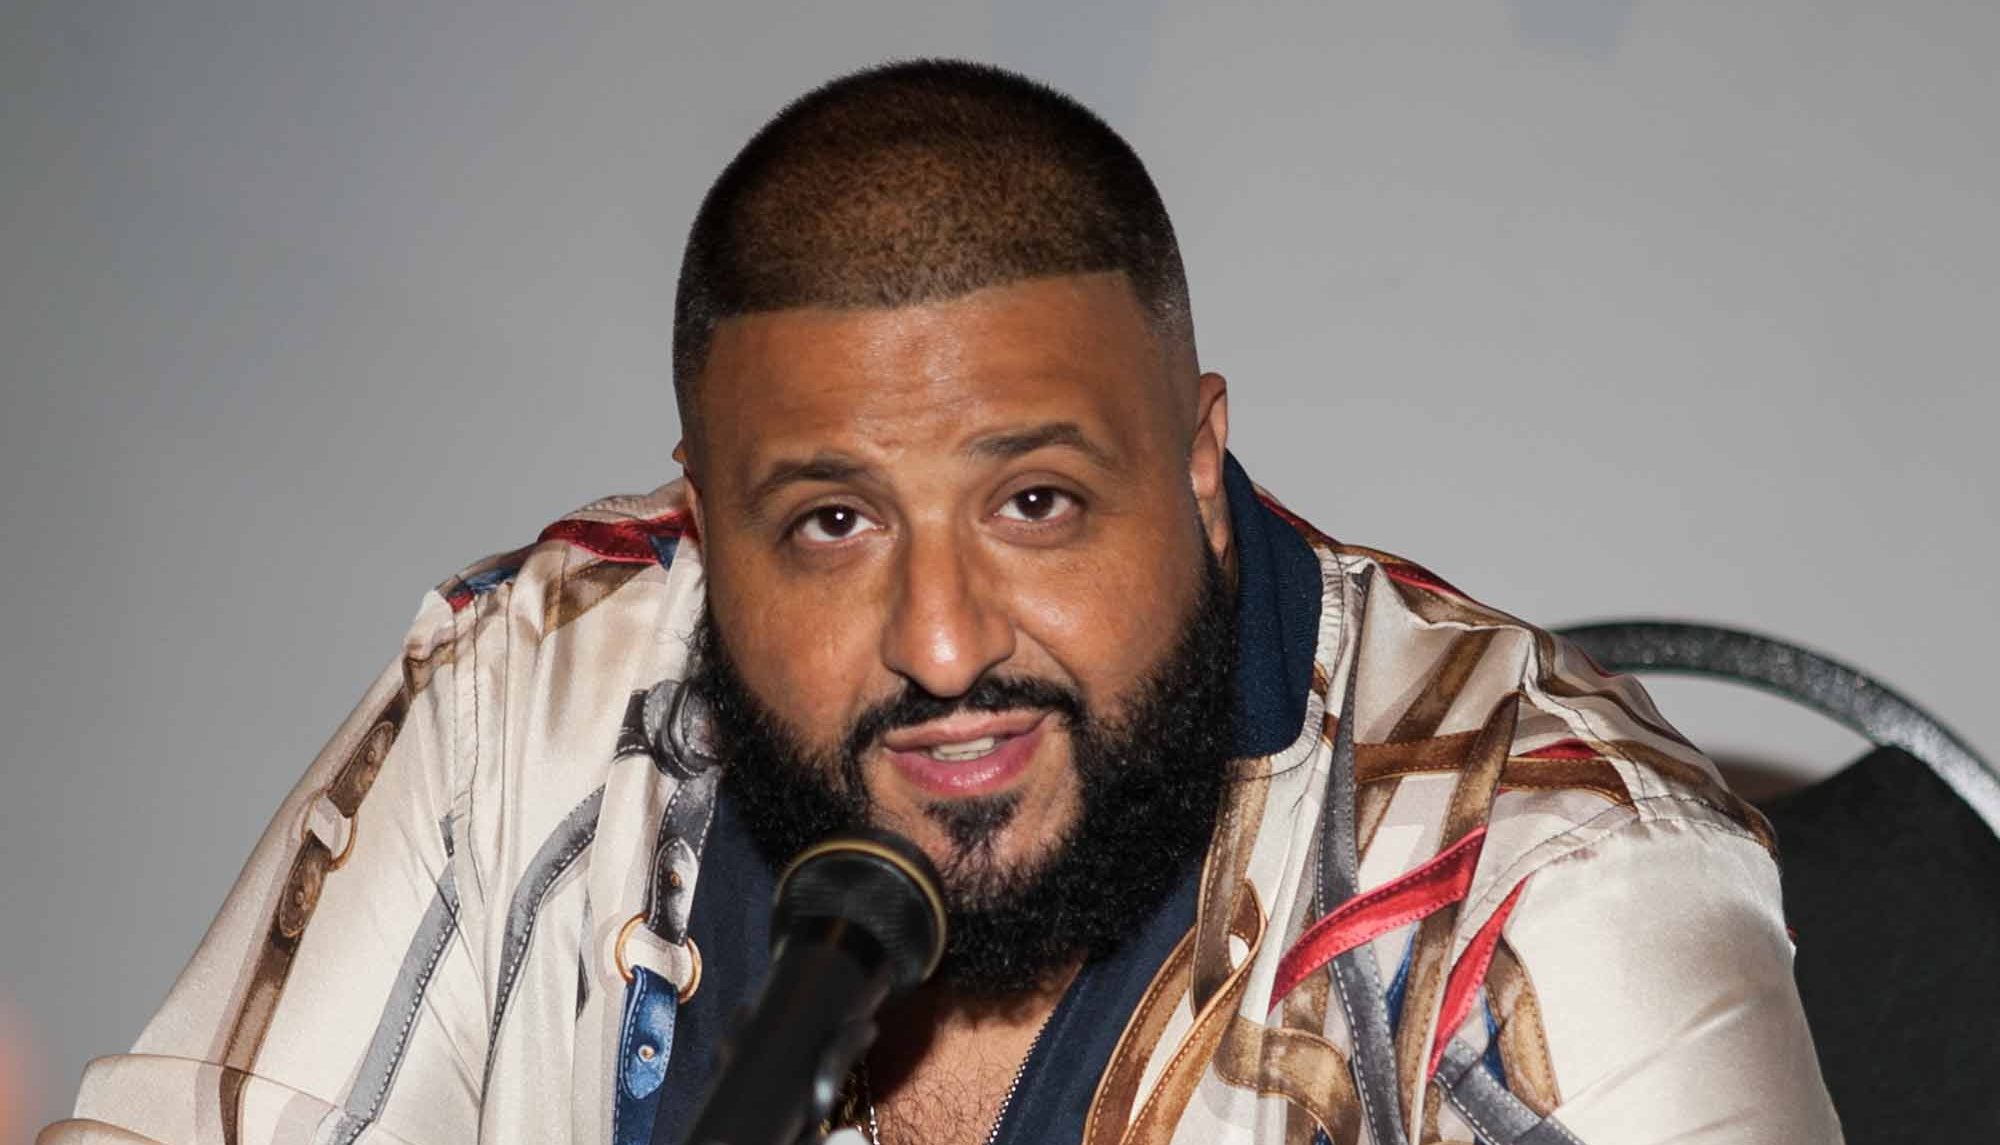 DJ Khaled donned a full hazmat suit as he left his home for the first time in more than three months – in order to get a root canal